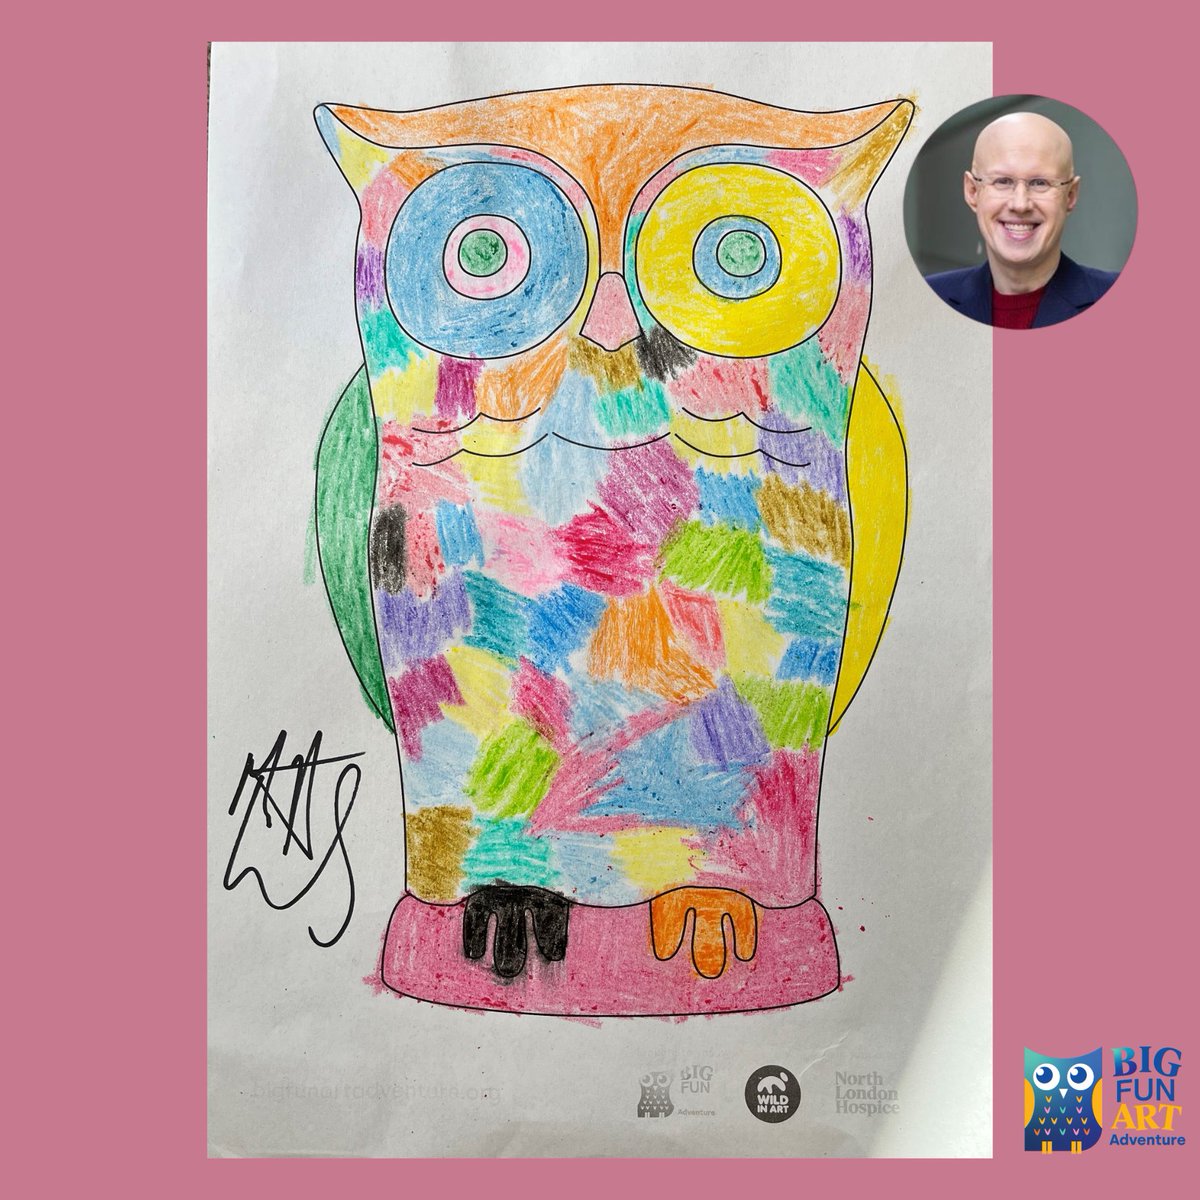 We are thrilled that @RealMattLucas has designed an Owl for the Big Fun Art! He said, “I am doing this for my friend’s son, Jack, who had outstanding care from North London Hospice - a vital and caring place that helps many people going through the toughest of times.”